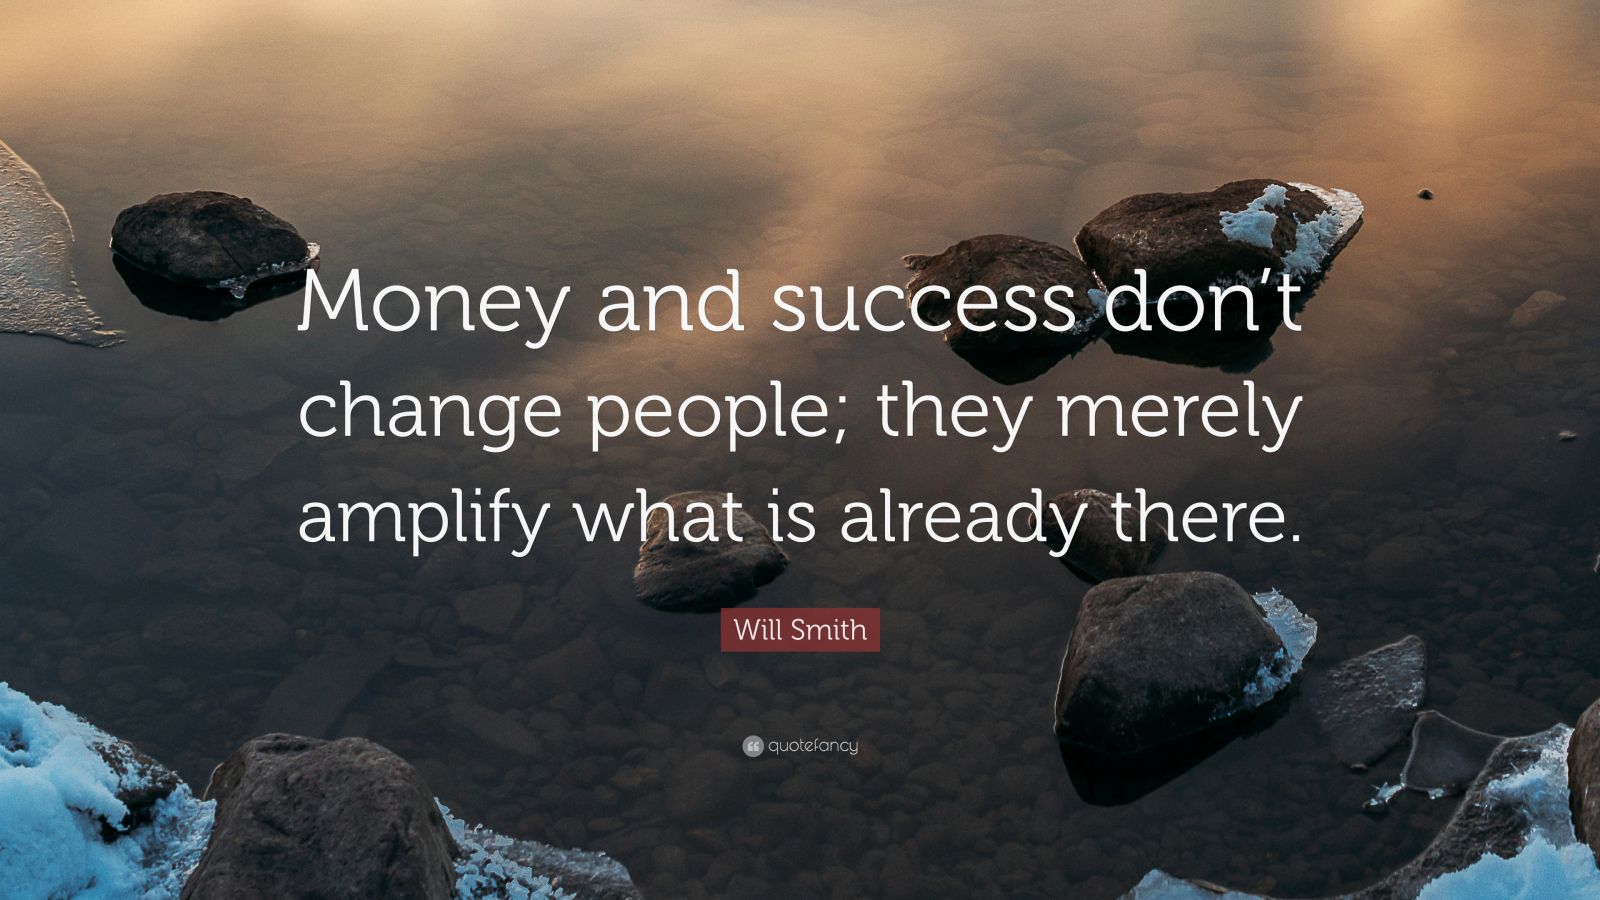 Will Smith Quote “Money and success don’t change people; they merely